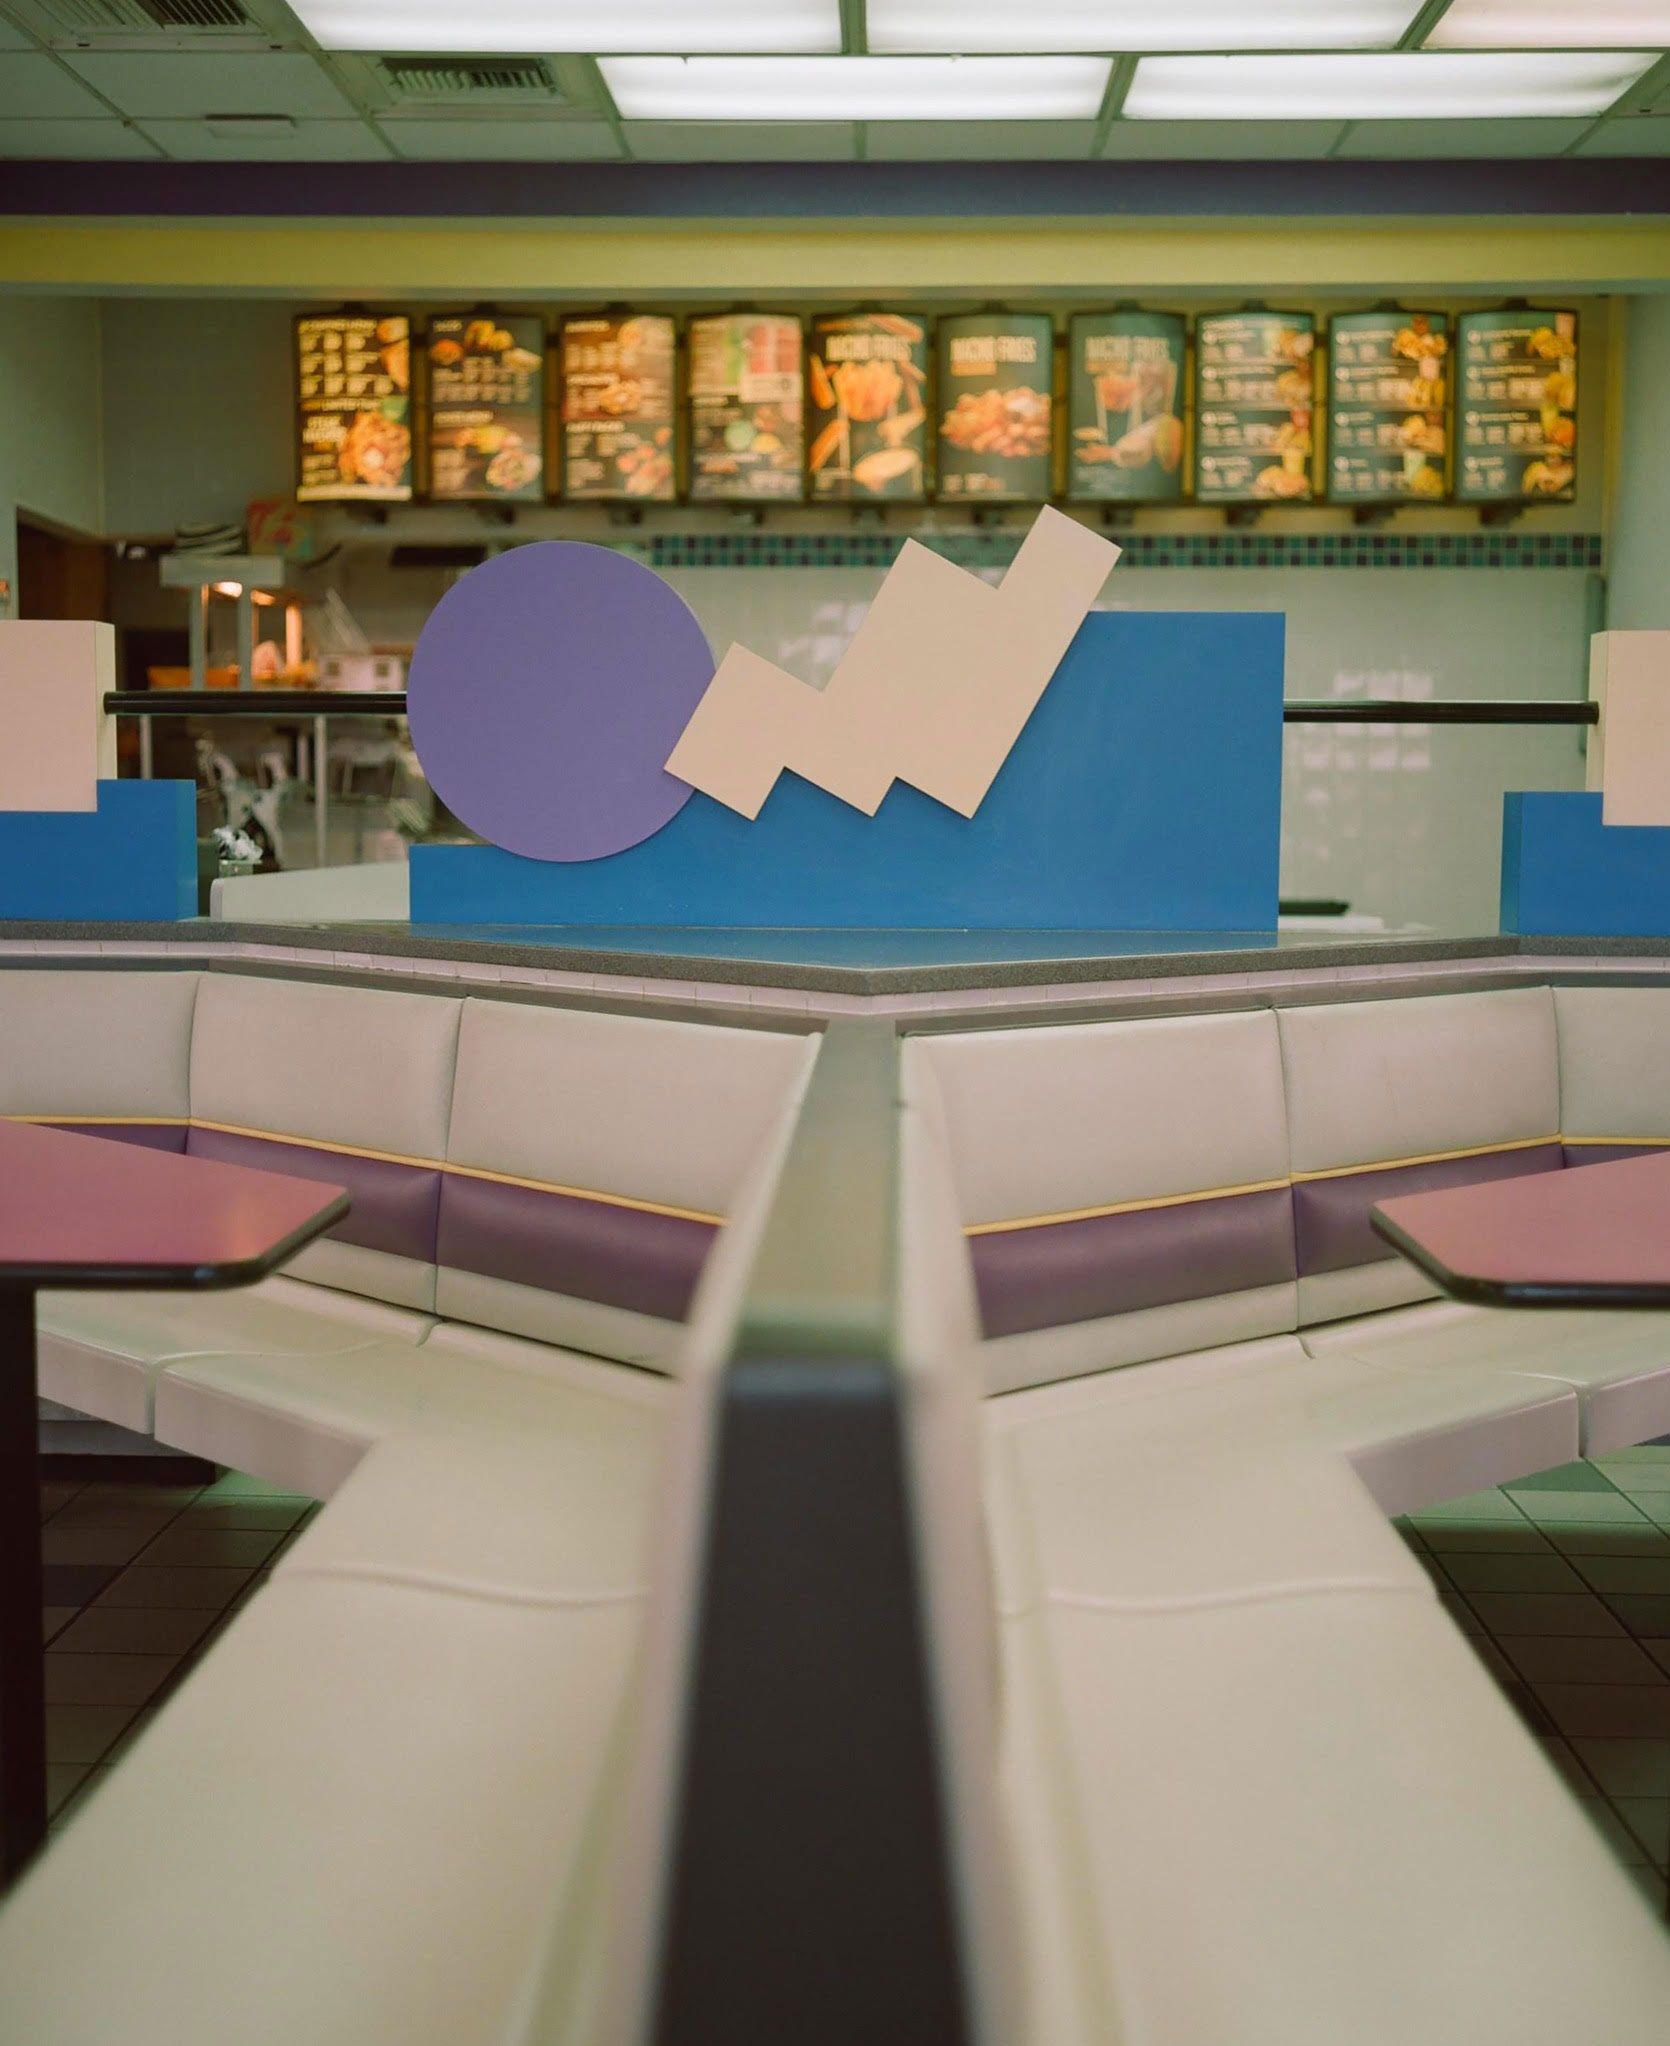 90s Taco Bell Restaurants Are Our Latest Source for Decor Ideas